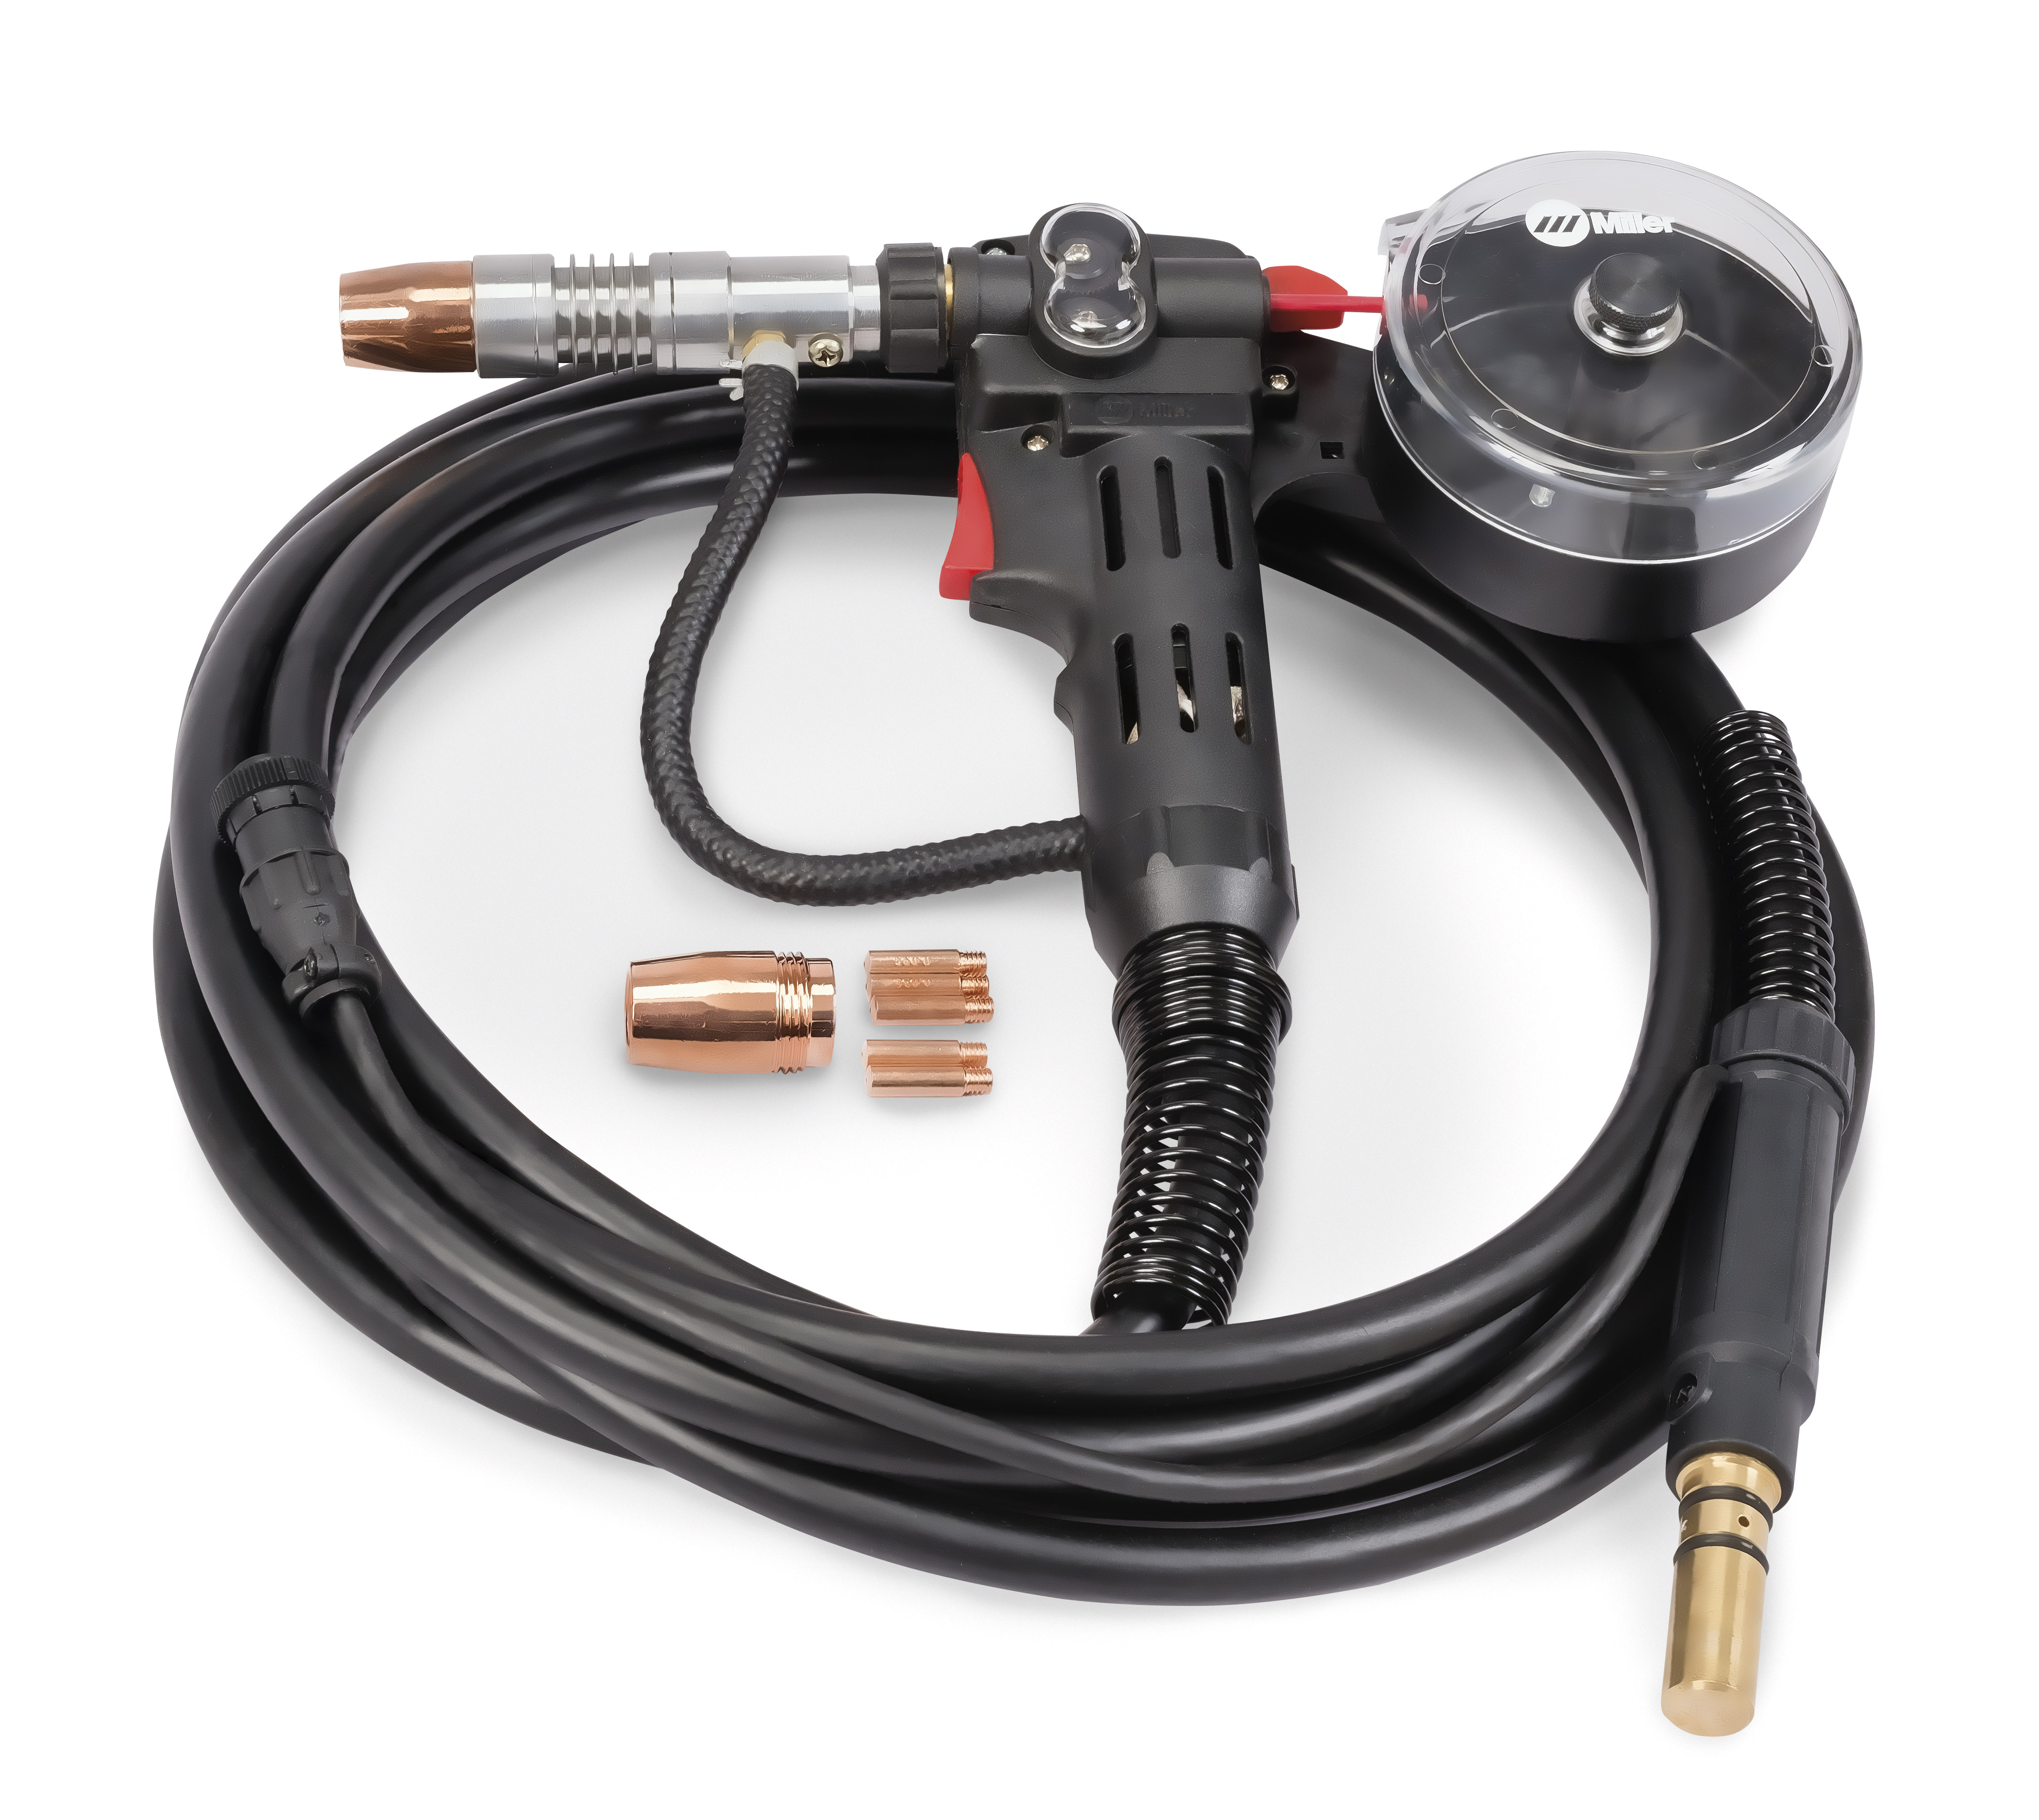 Miller 150 Amp .030" - .035" Spoolmate 150 Spool Gun With 20' Cable